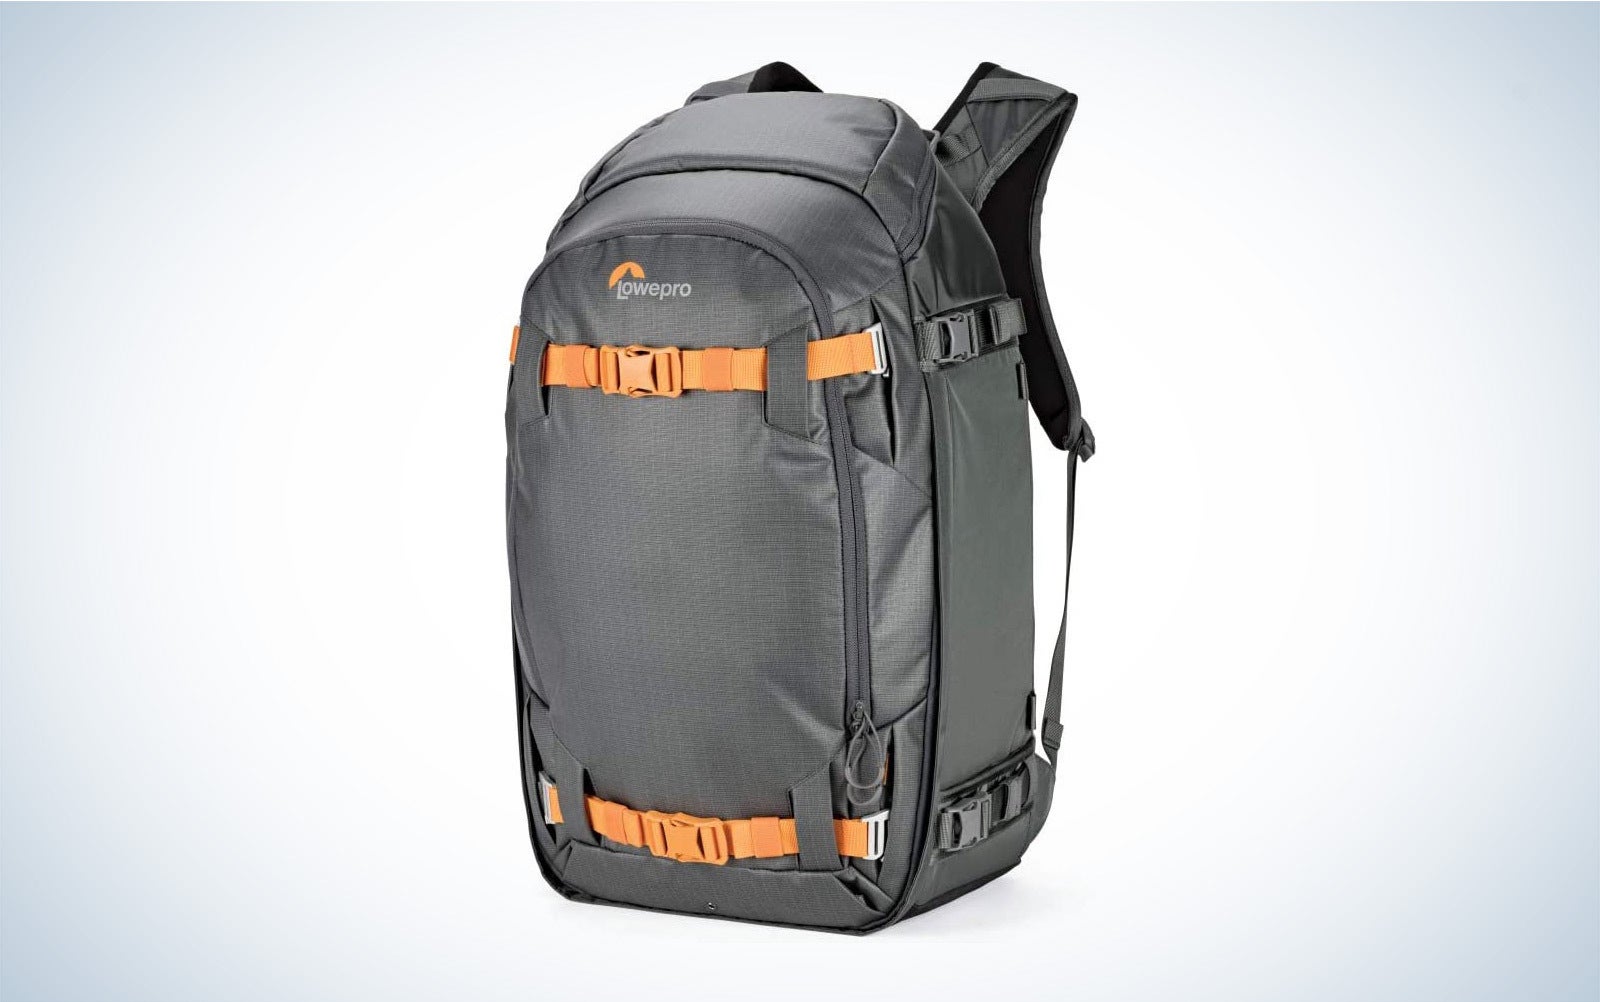 The Lowepro Whistler is the best for winter trips.